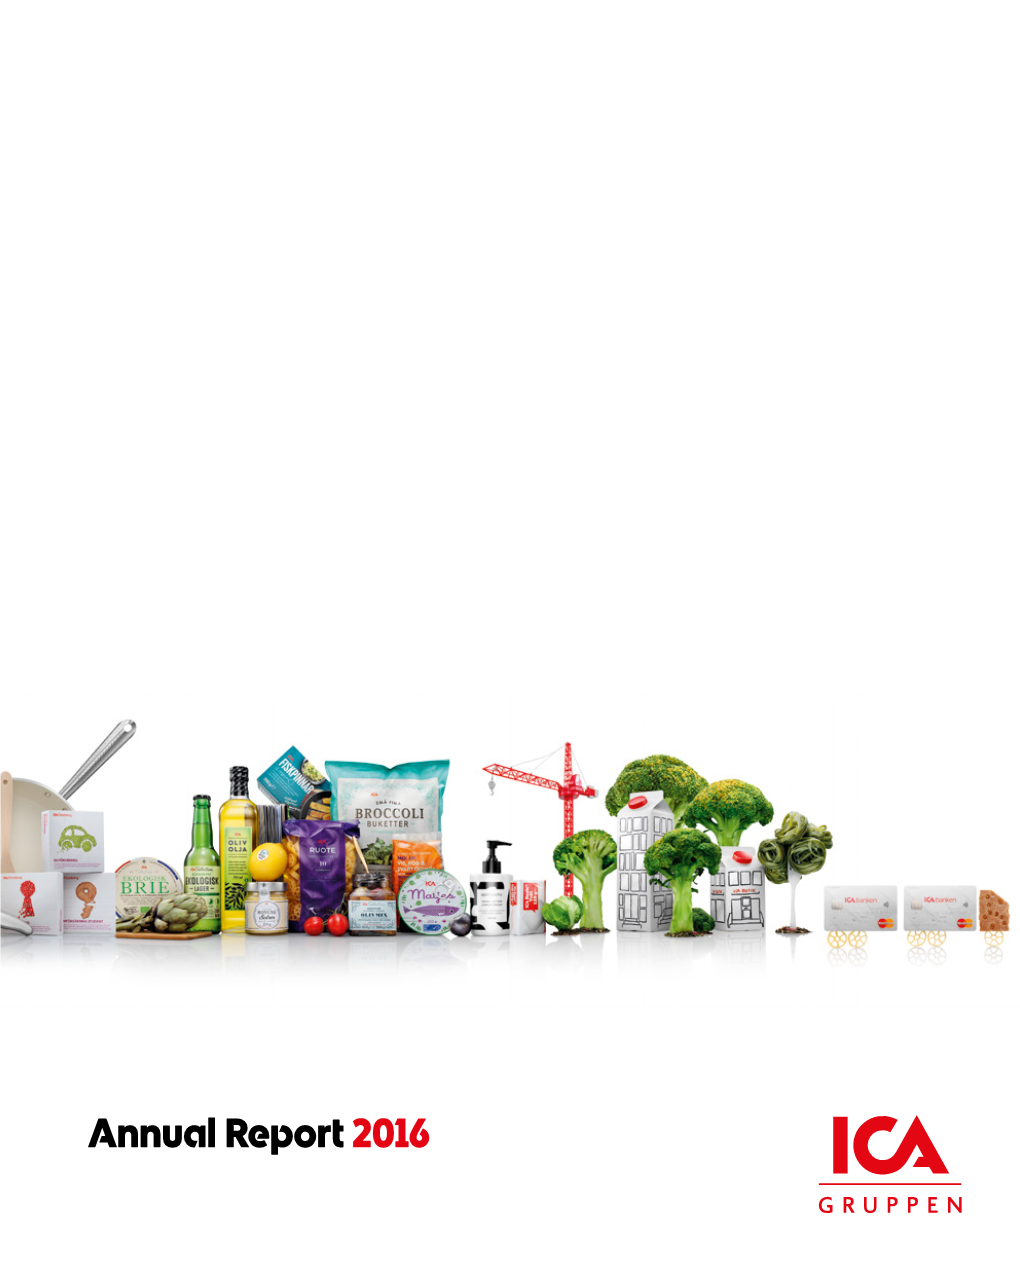 ICA Gruppen Annual Report 2016 1 the Year in Summary